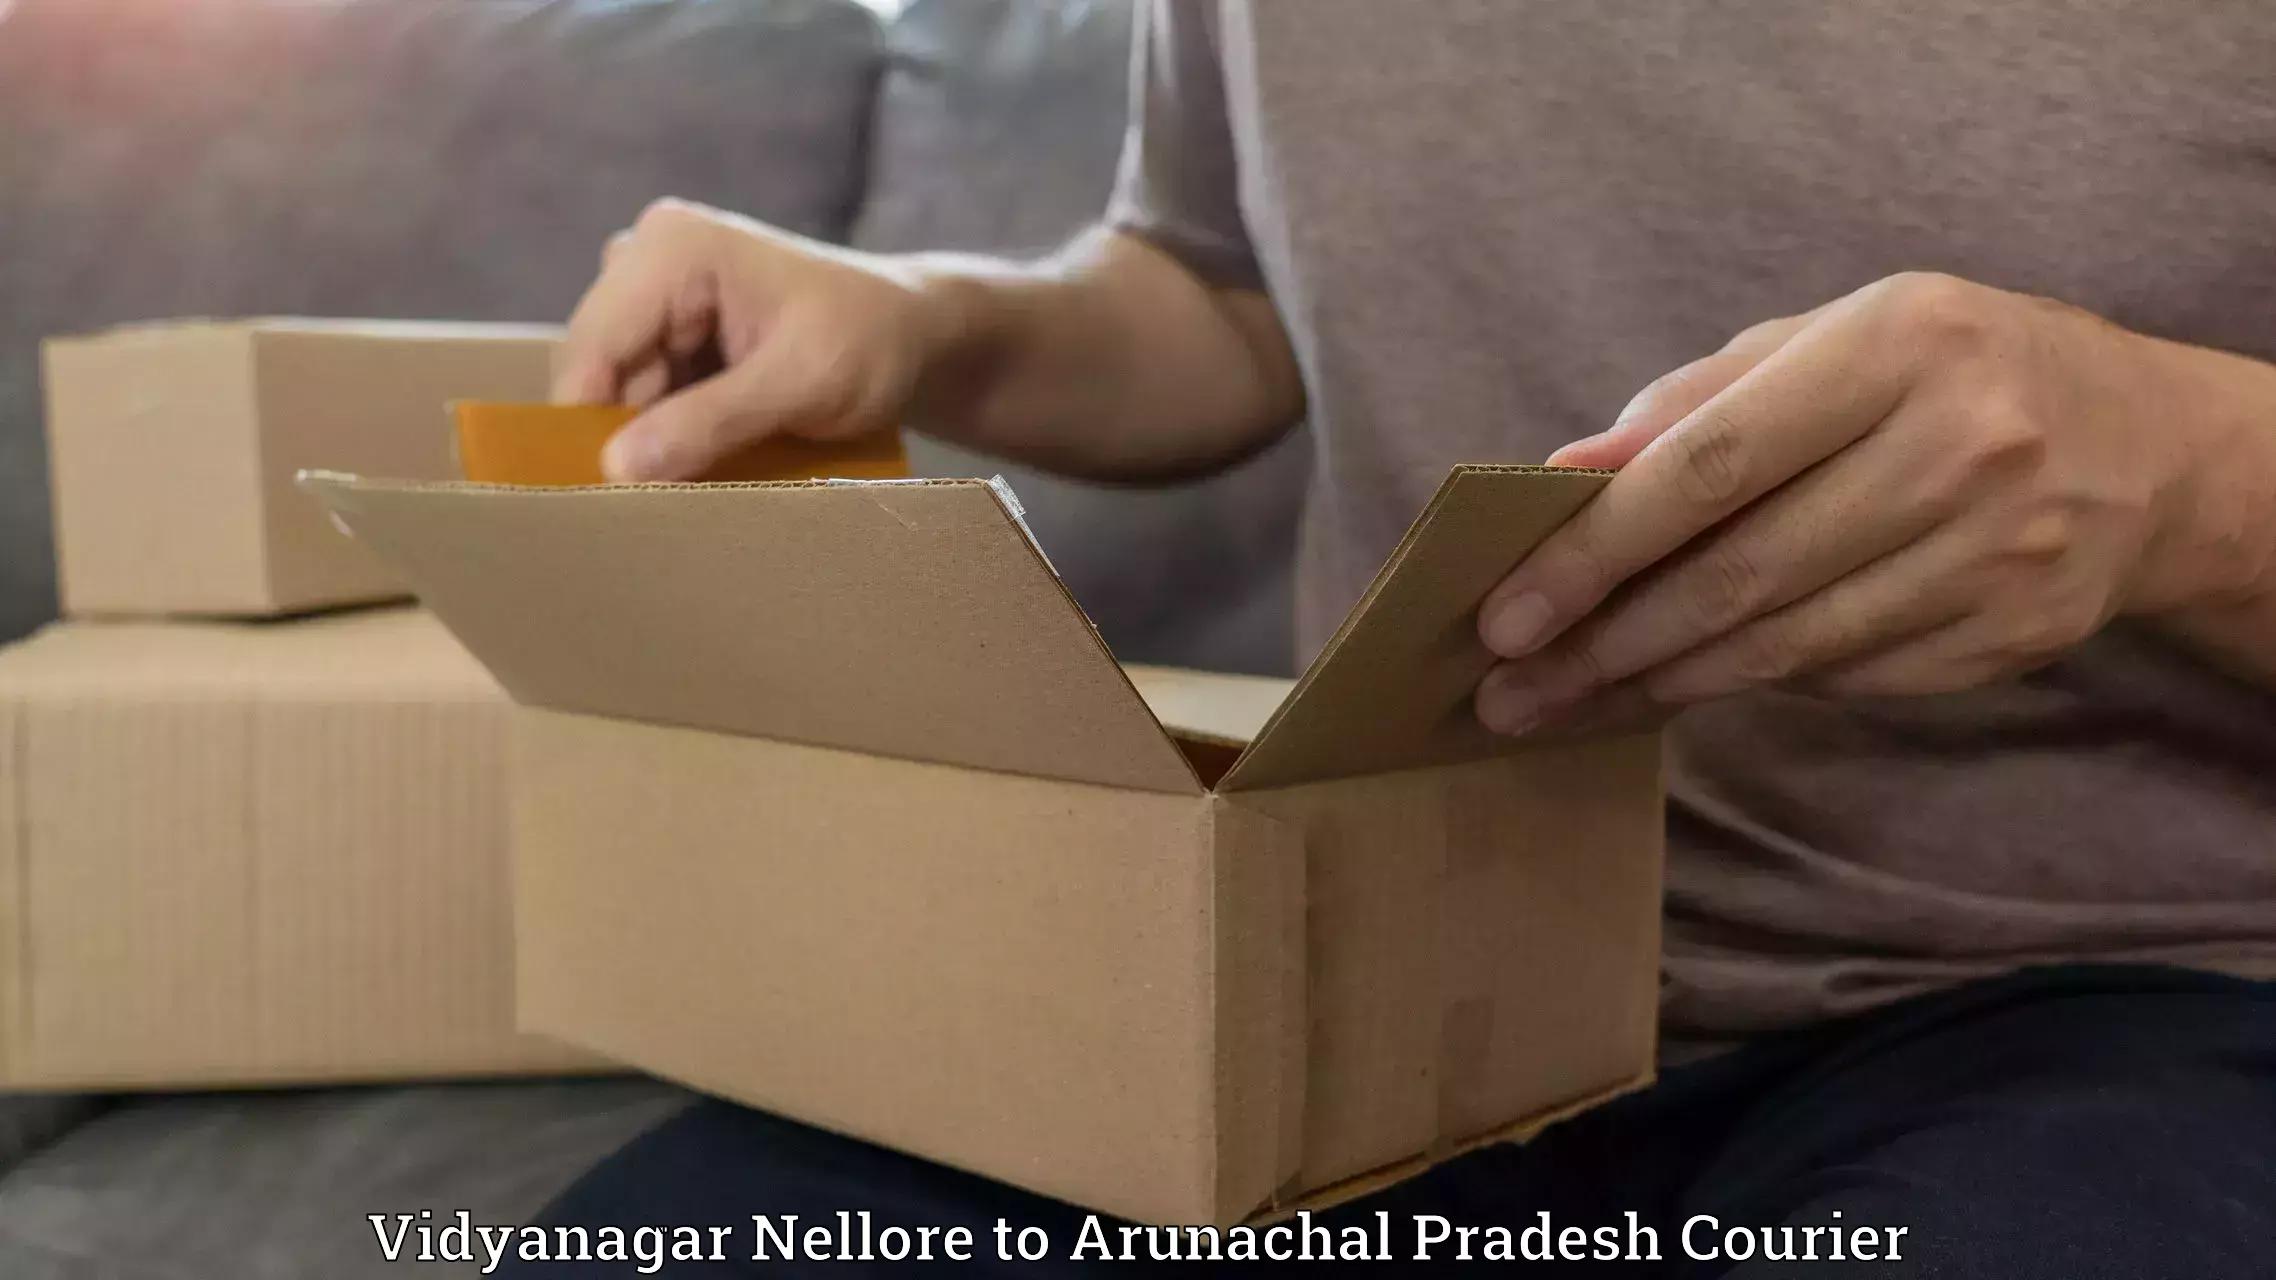 Secure package delivery Vidyanagar Nellore to Yingkiong